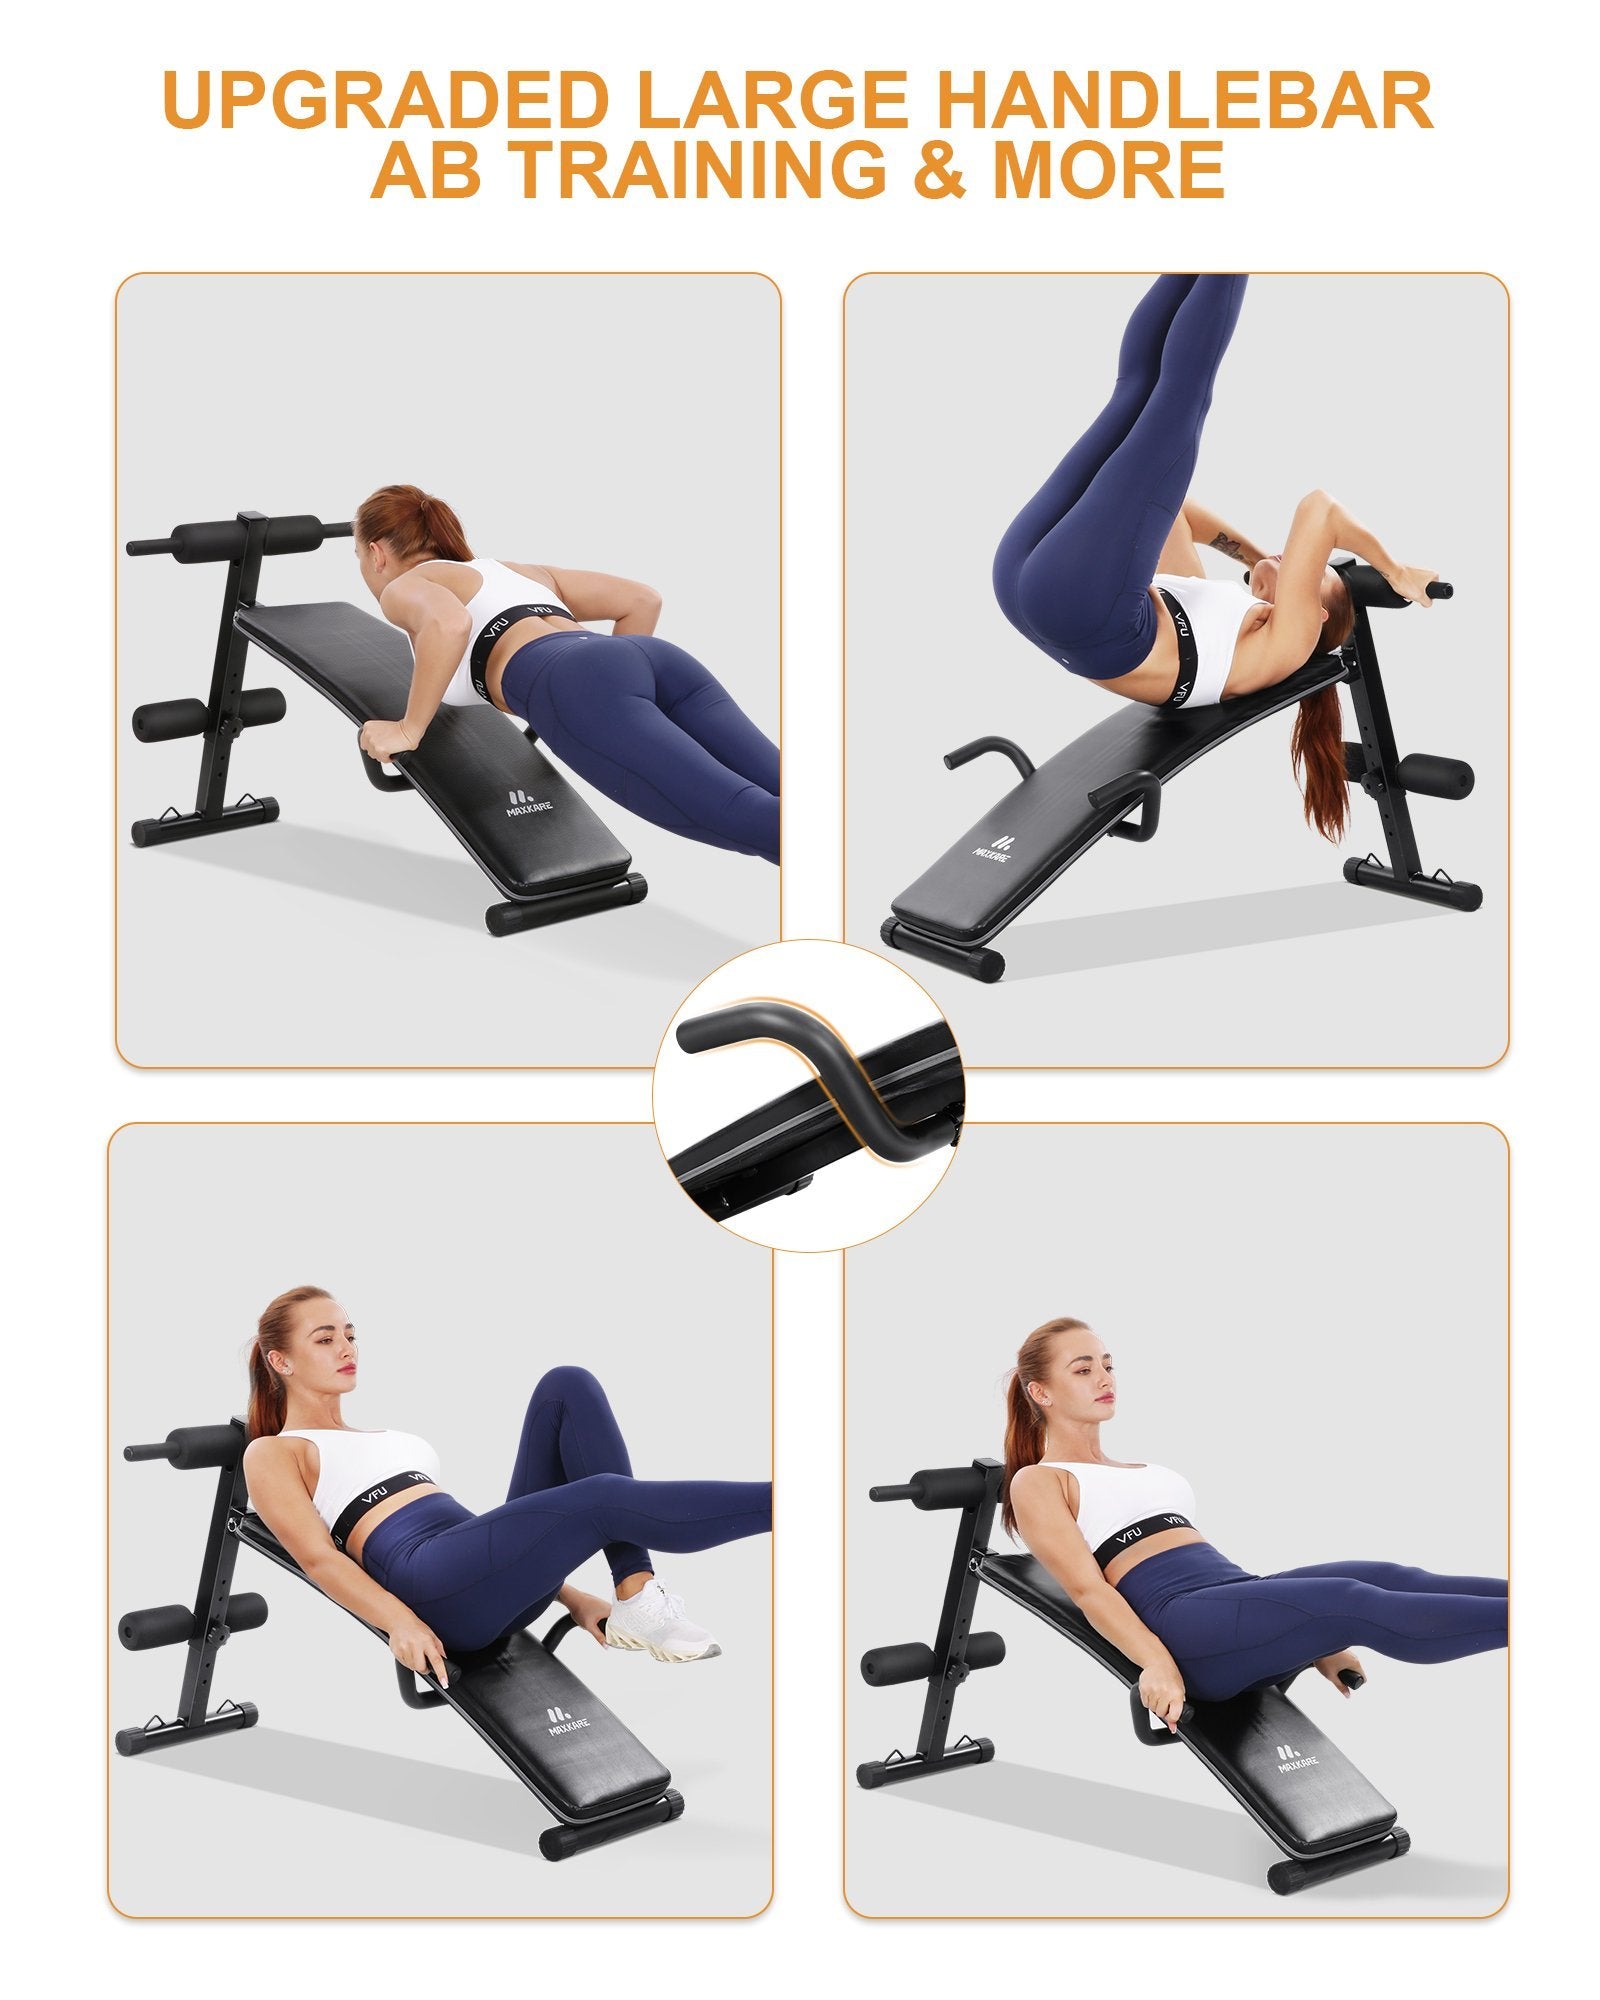 Load image into Gallery viewer, Sit Up Ab Bench Adjustable|MaxKare Foldable Slant Board for Sit-up Abdominal Exercise|Utility Workout Equipment Bench for Home Gym|Decline Recline Situp Benches - NAIPO
